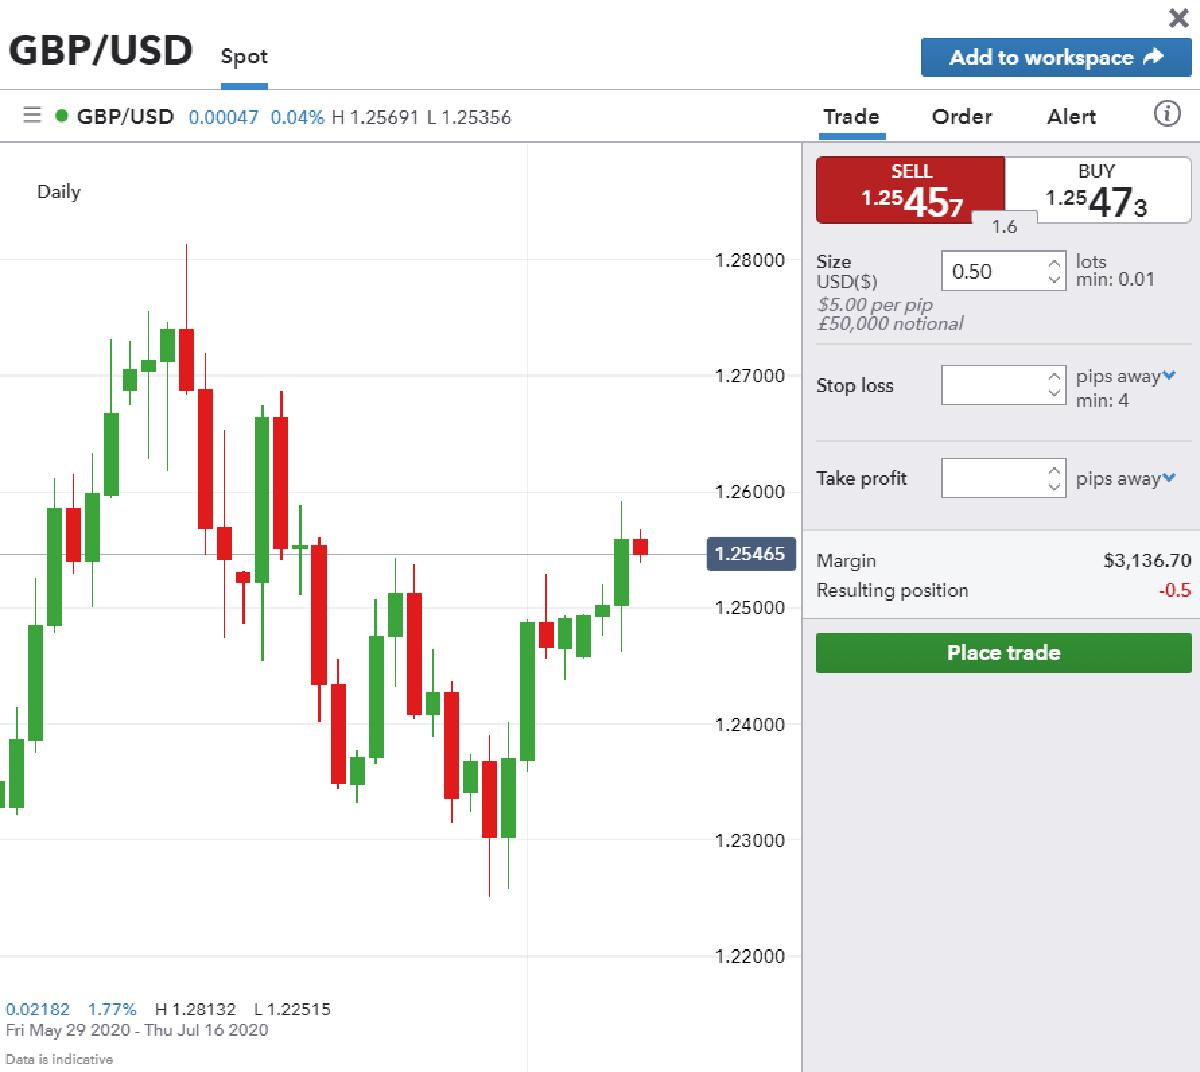 Currency shorting for GBP/USD